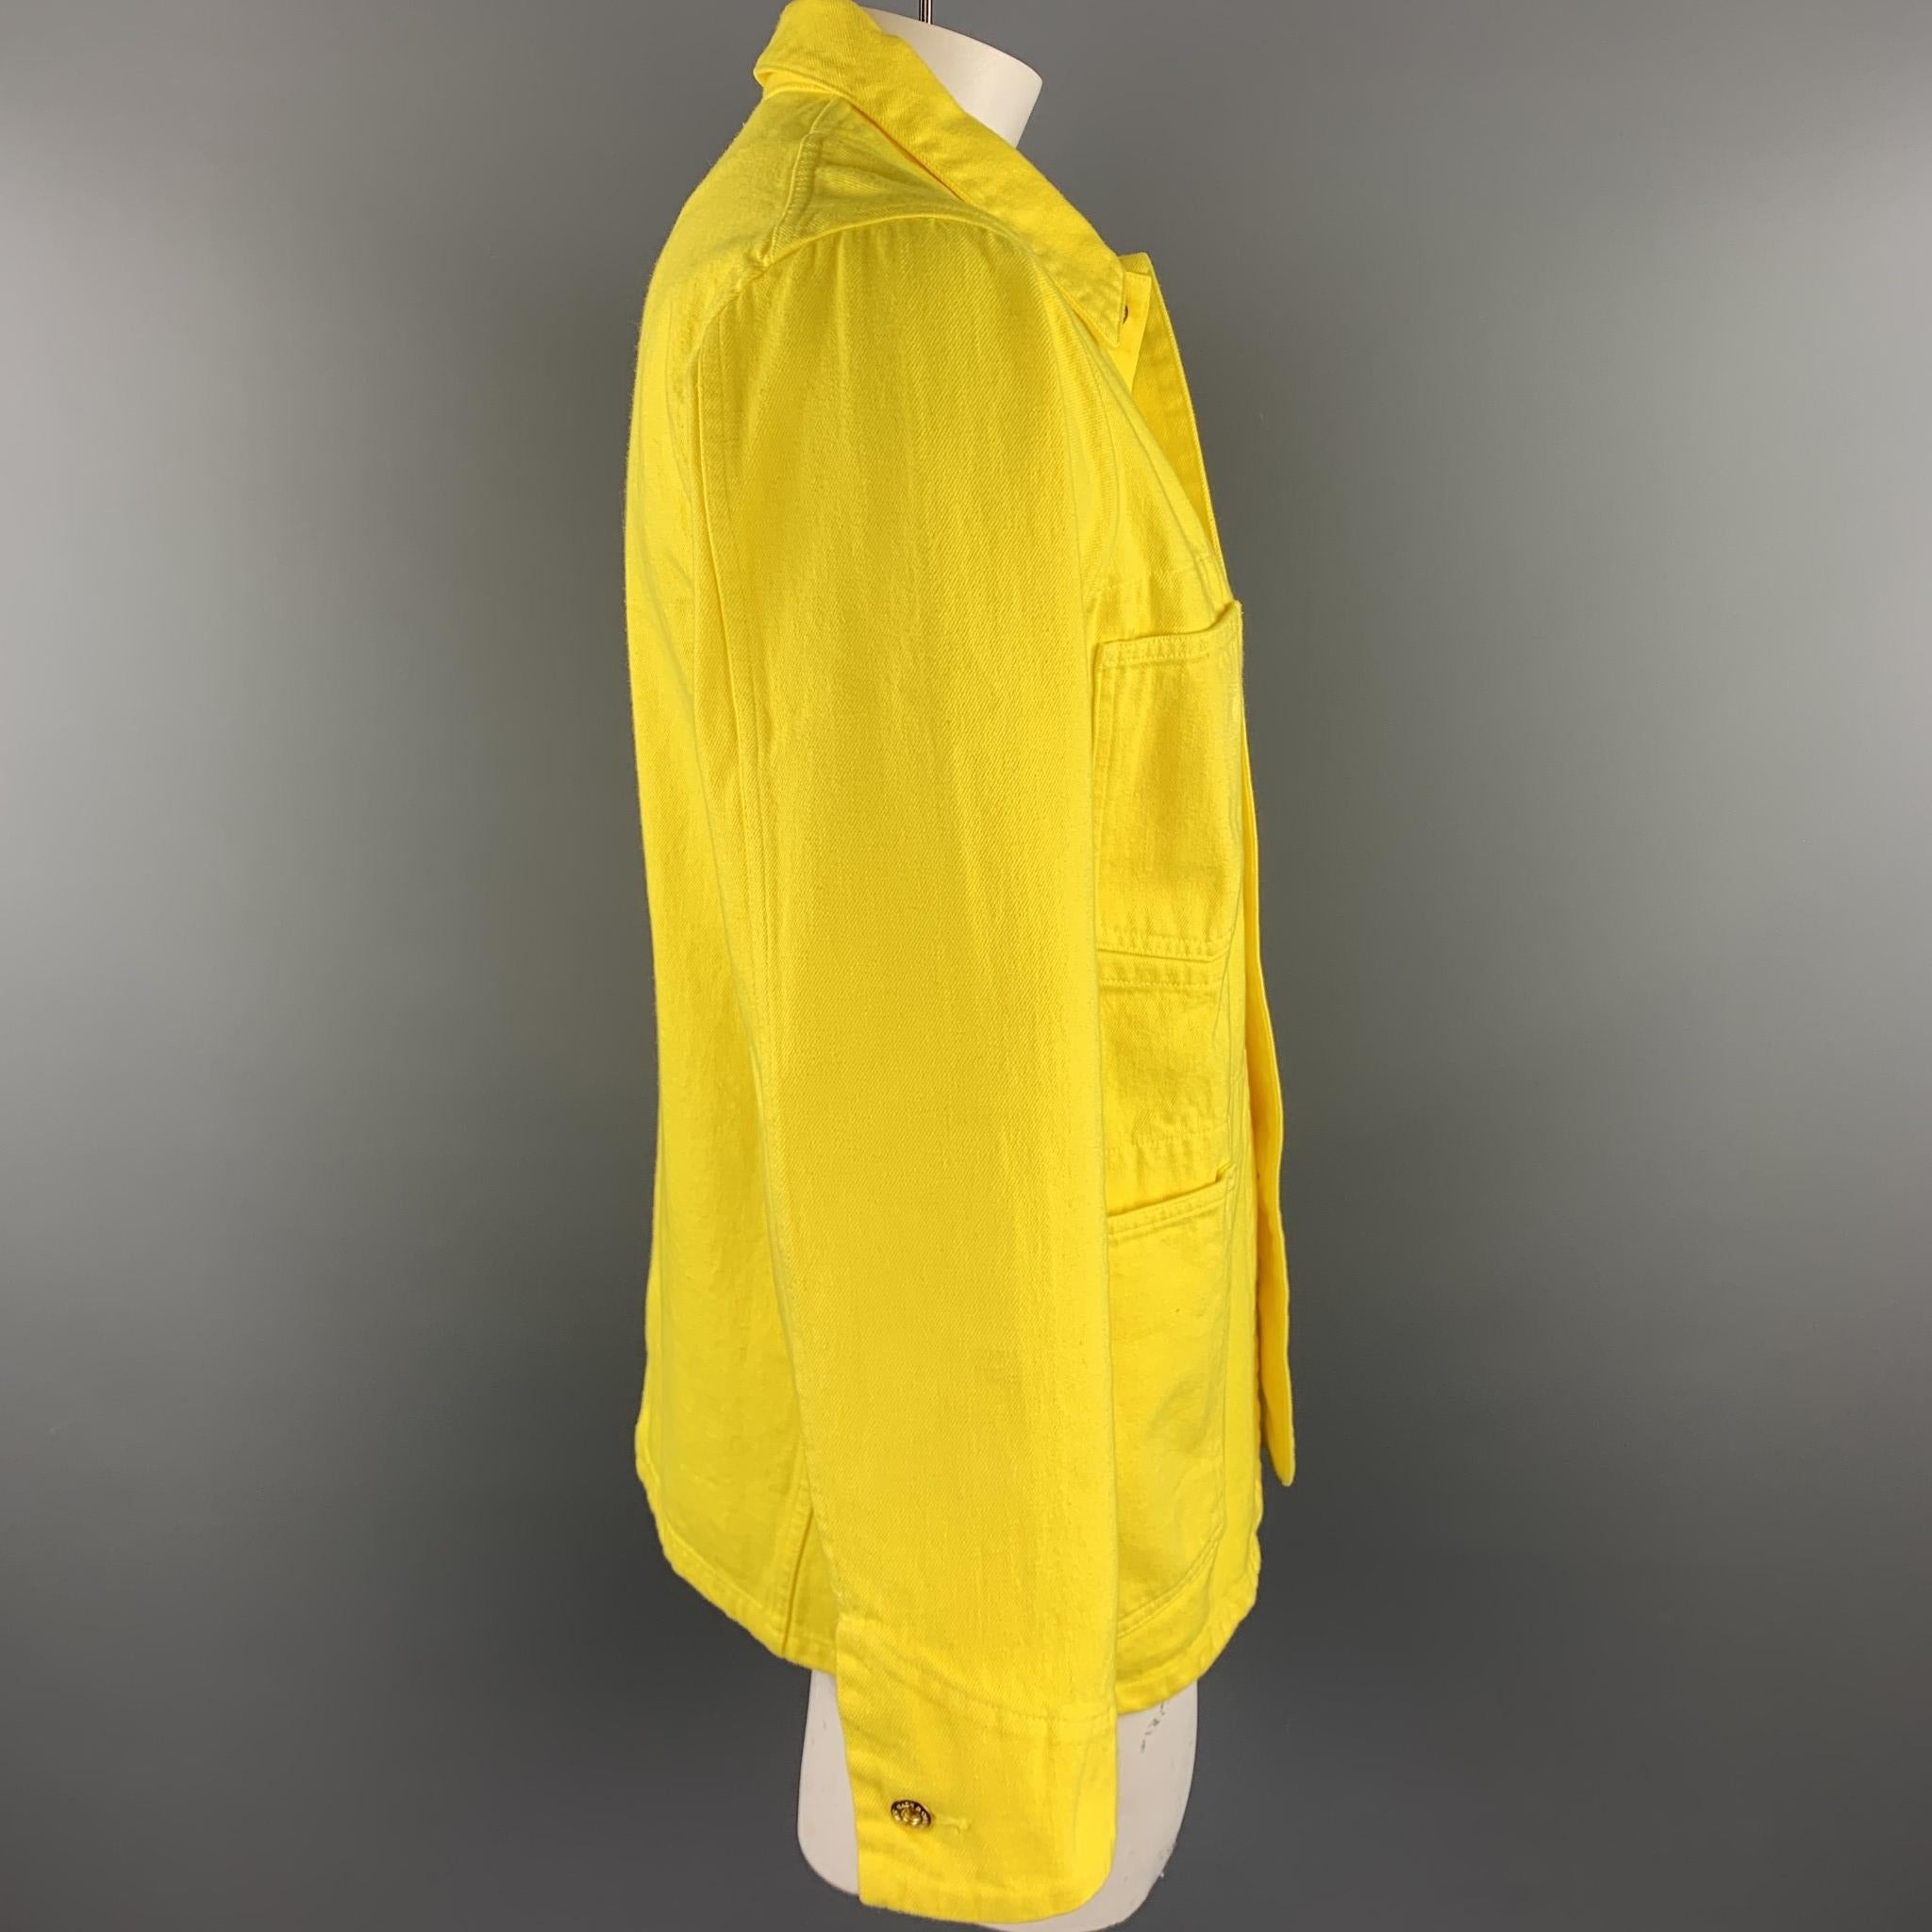 LEVI'S MADE & CRAFTED jacket comes in a yellow cotton featuring a worker style, front patch pockets, spread collar, and a buttoned closure. Made in Japan.

Very Good Pre-Owned Condition.
Marked: M

Measurements:

Shoulder: 18 in.
Chest: 44 in.